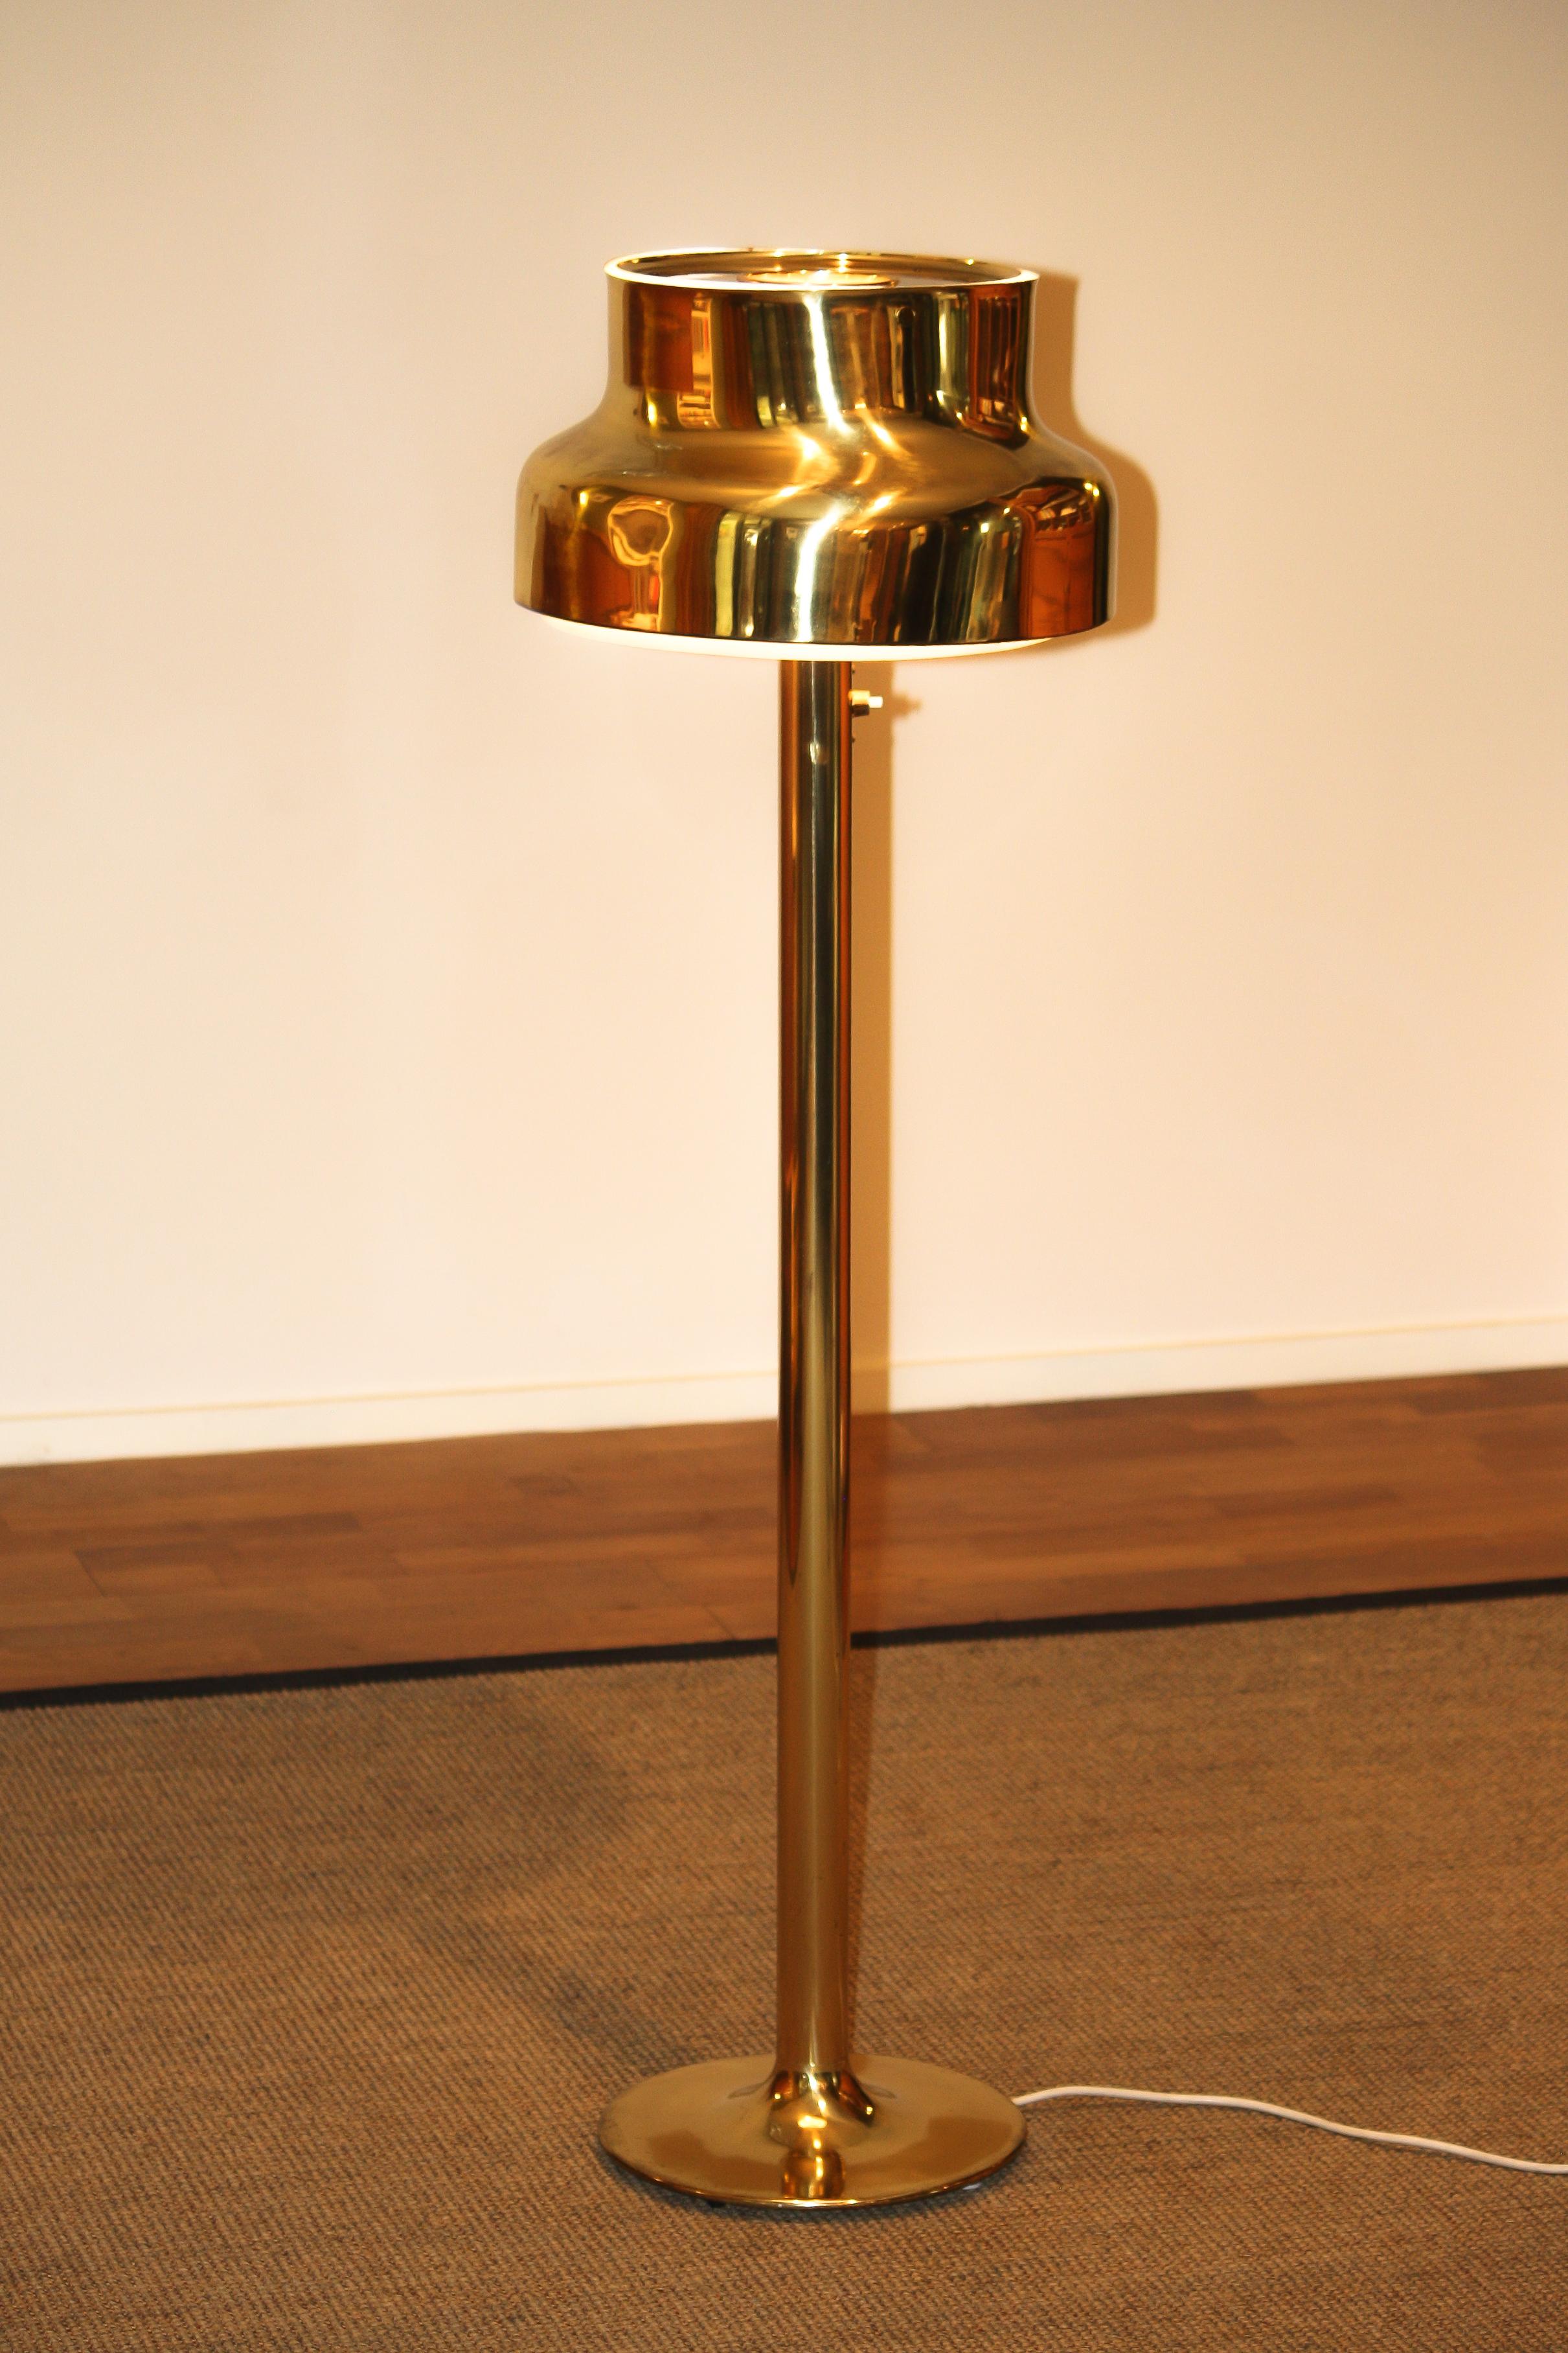 Mid-20th Century 1960s Golden or Brass Floor Lamp by Anders Pehrson ‘Bumling’ for Ateljé Lyktan